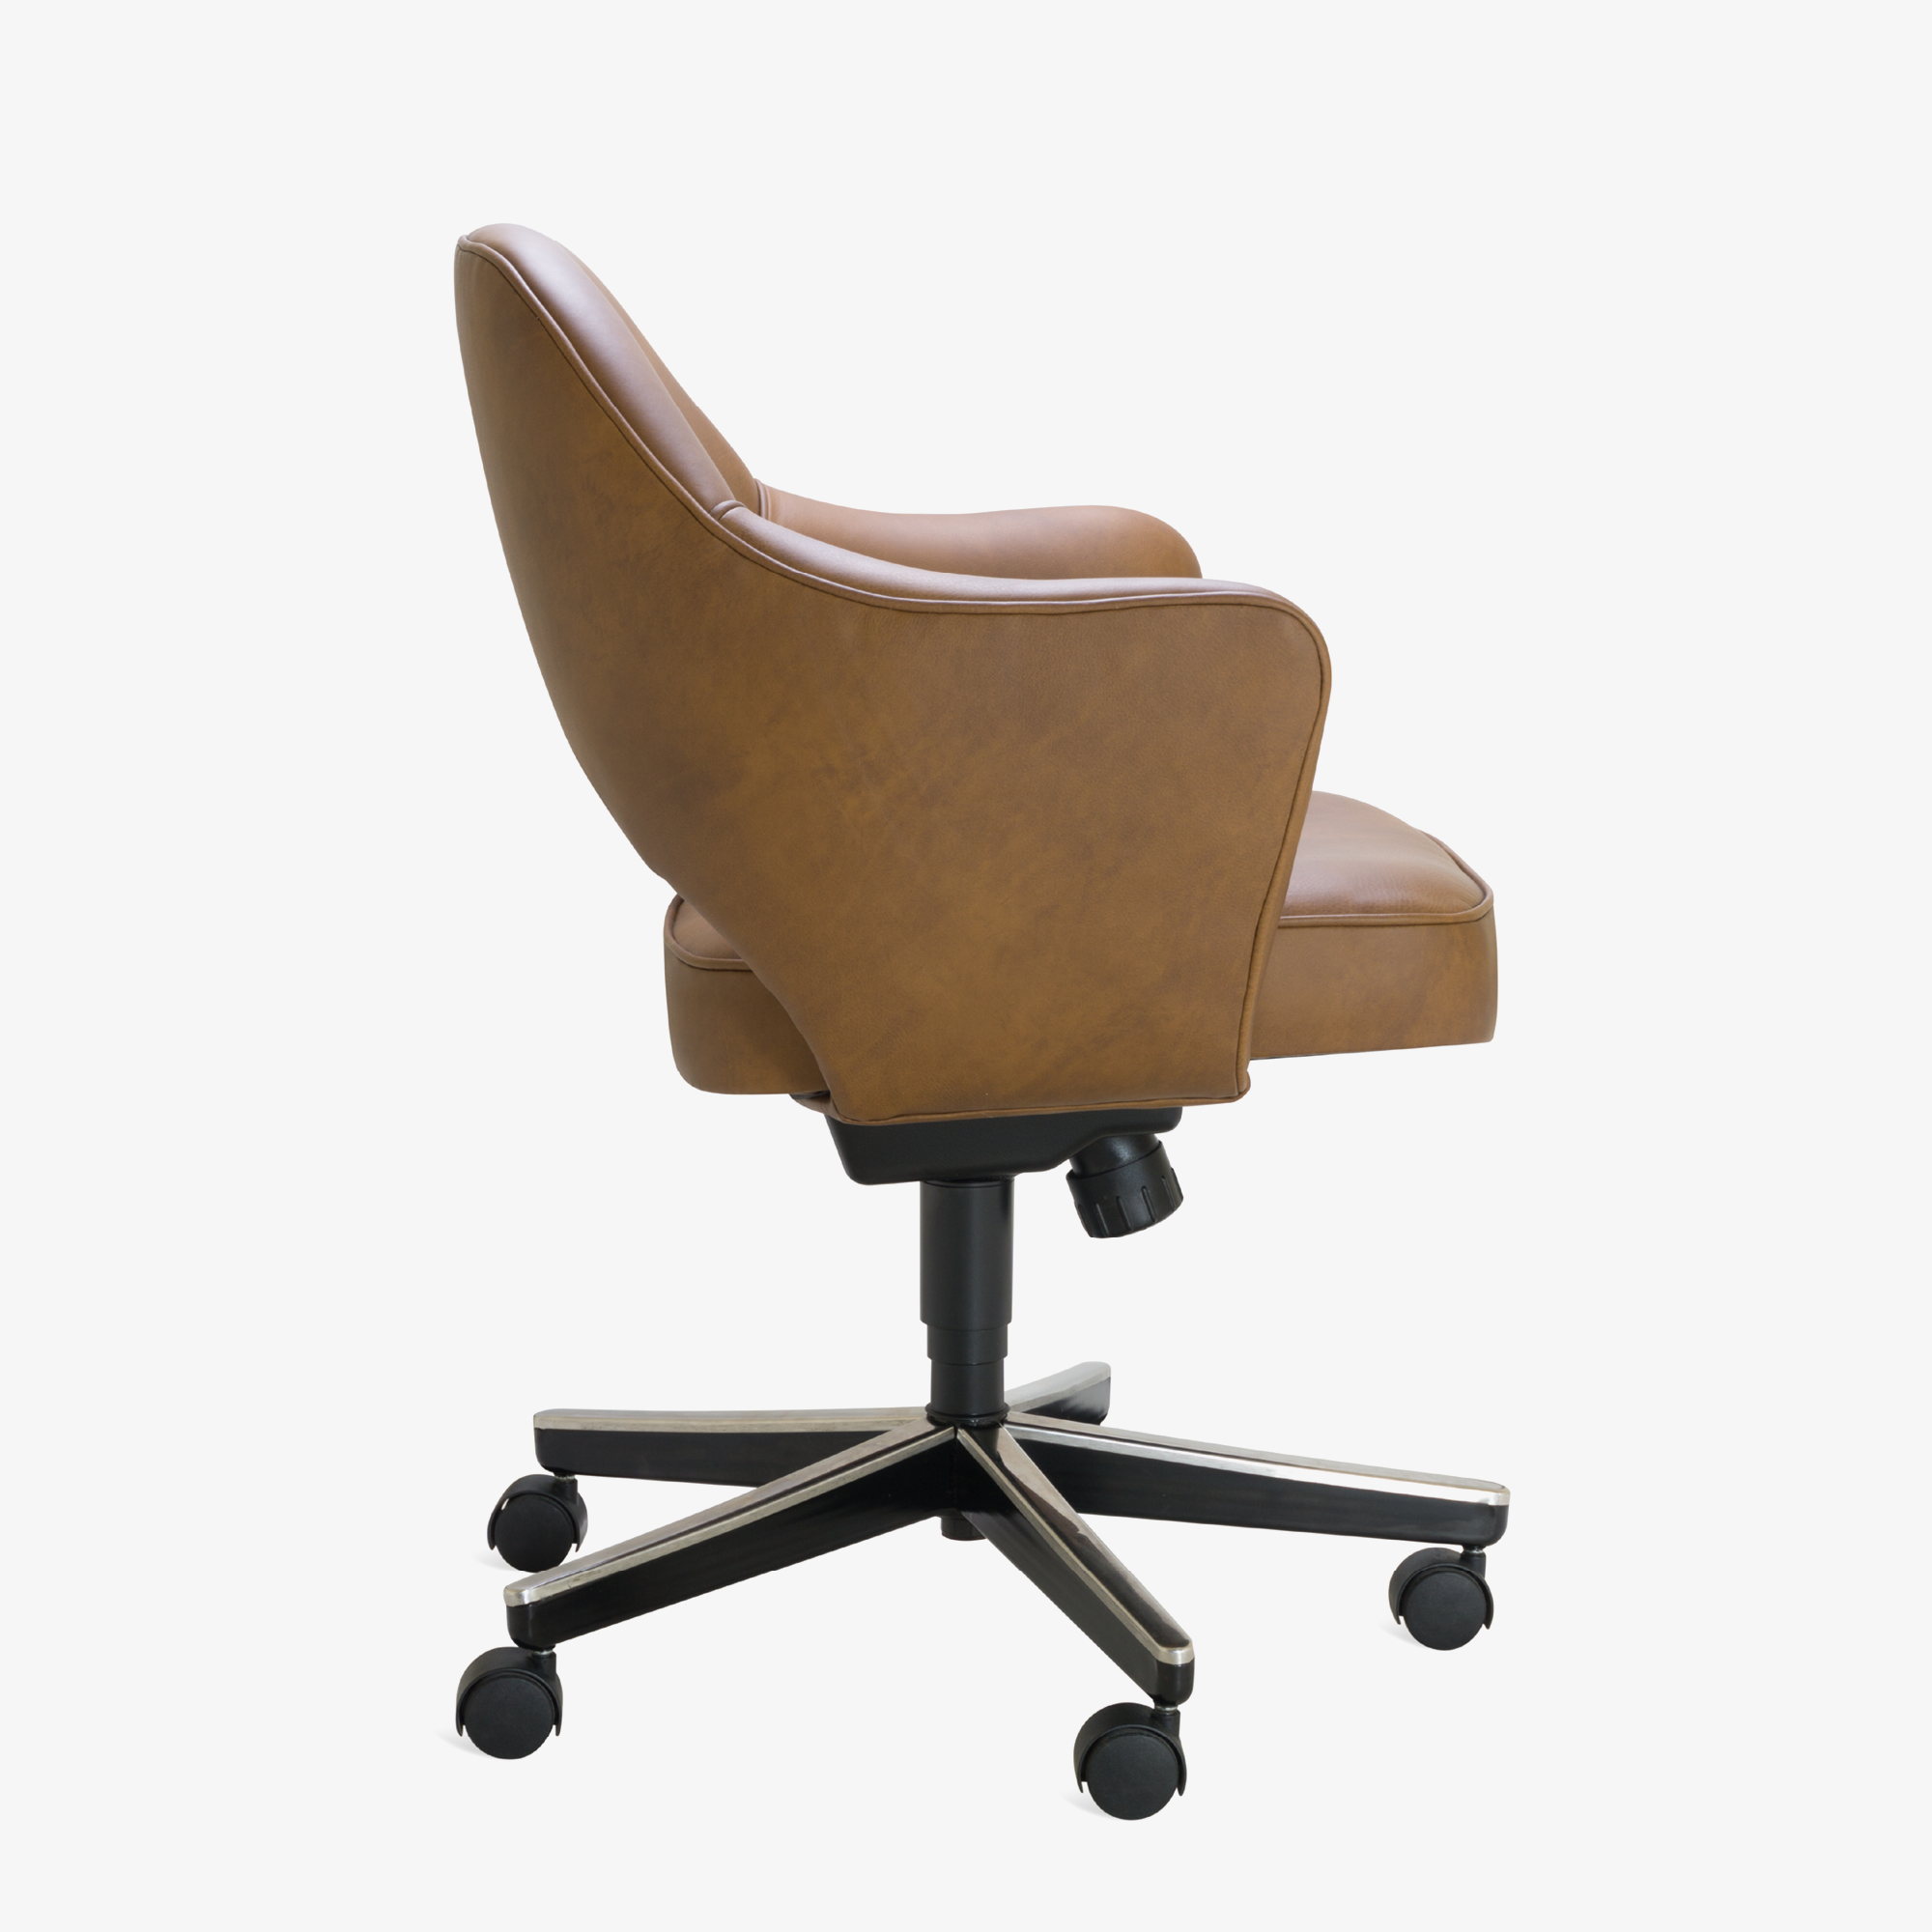 Saarinen Executive Arm Chair in Saddle Leather, Swivel Base3.png